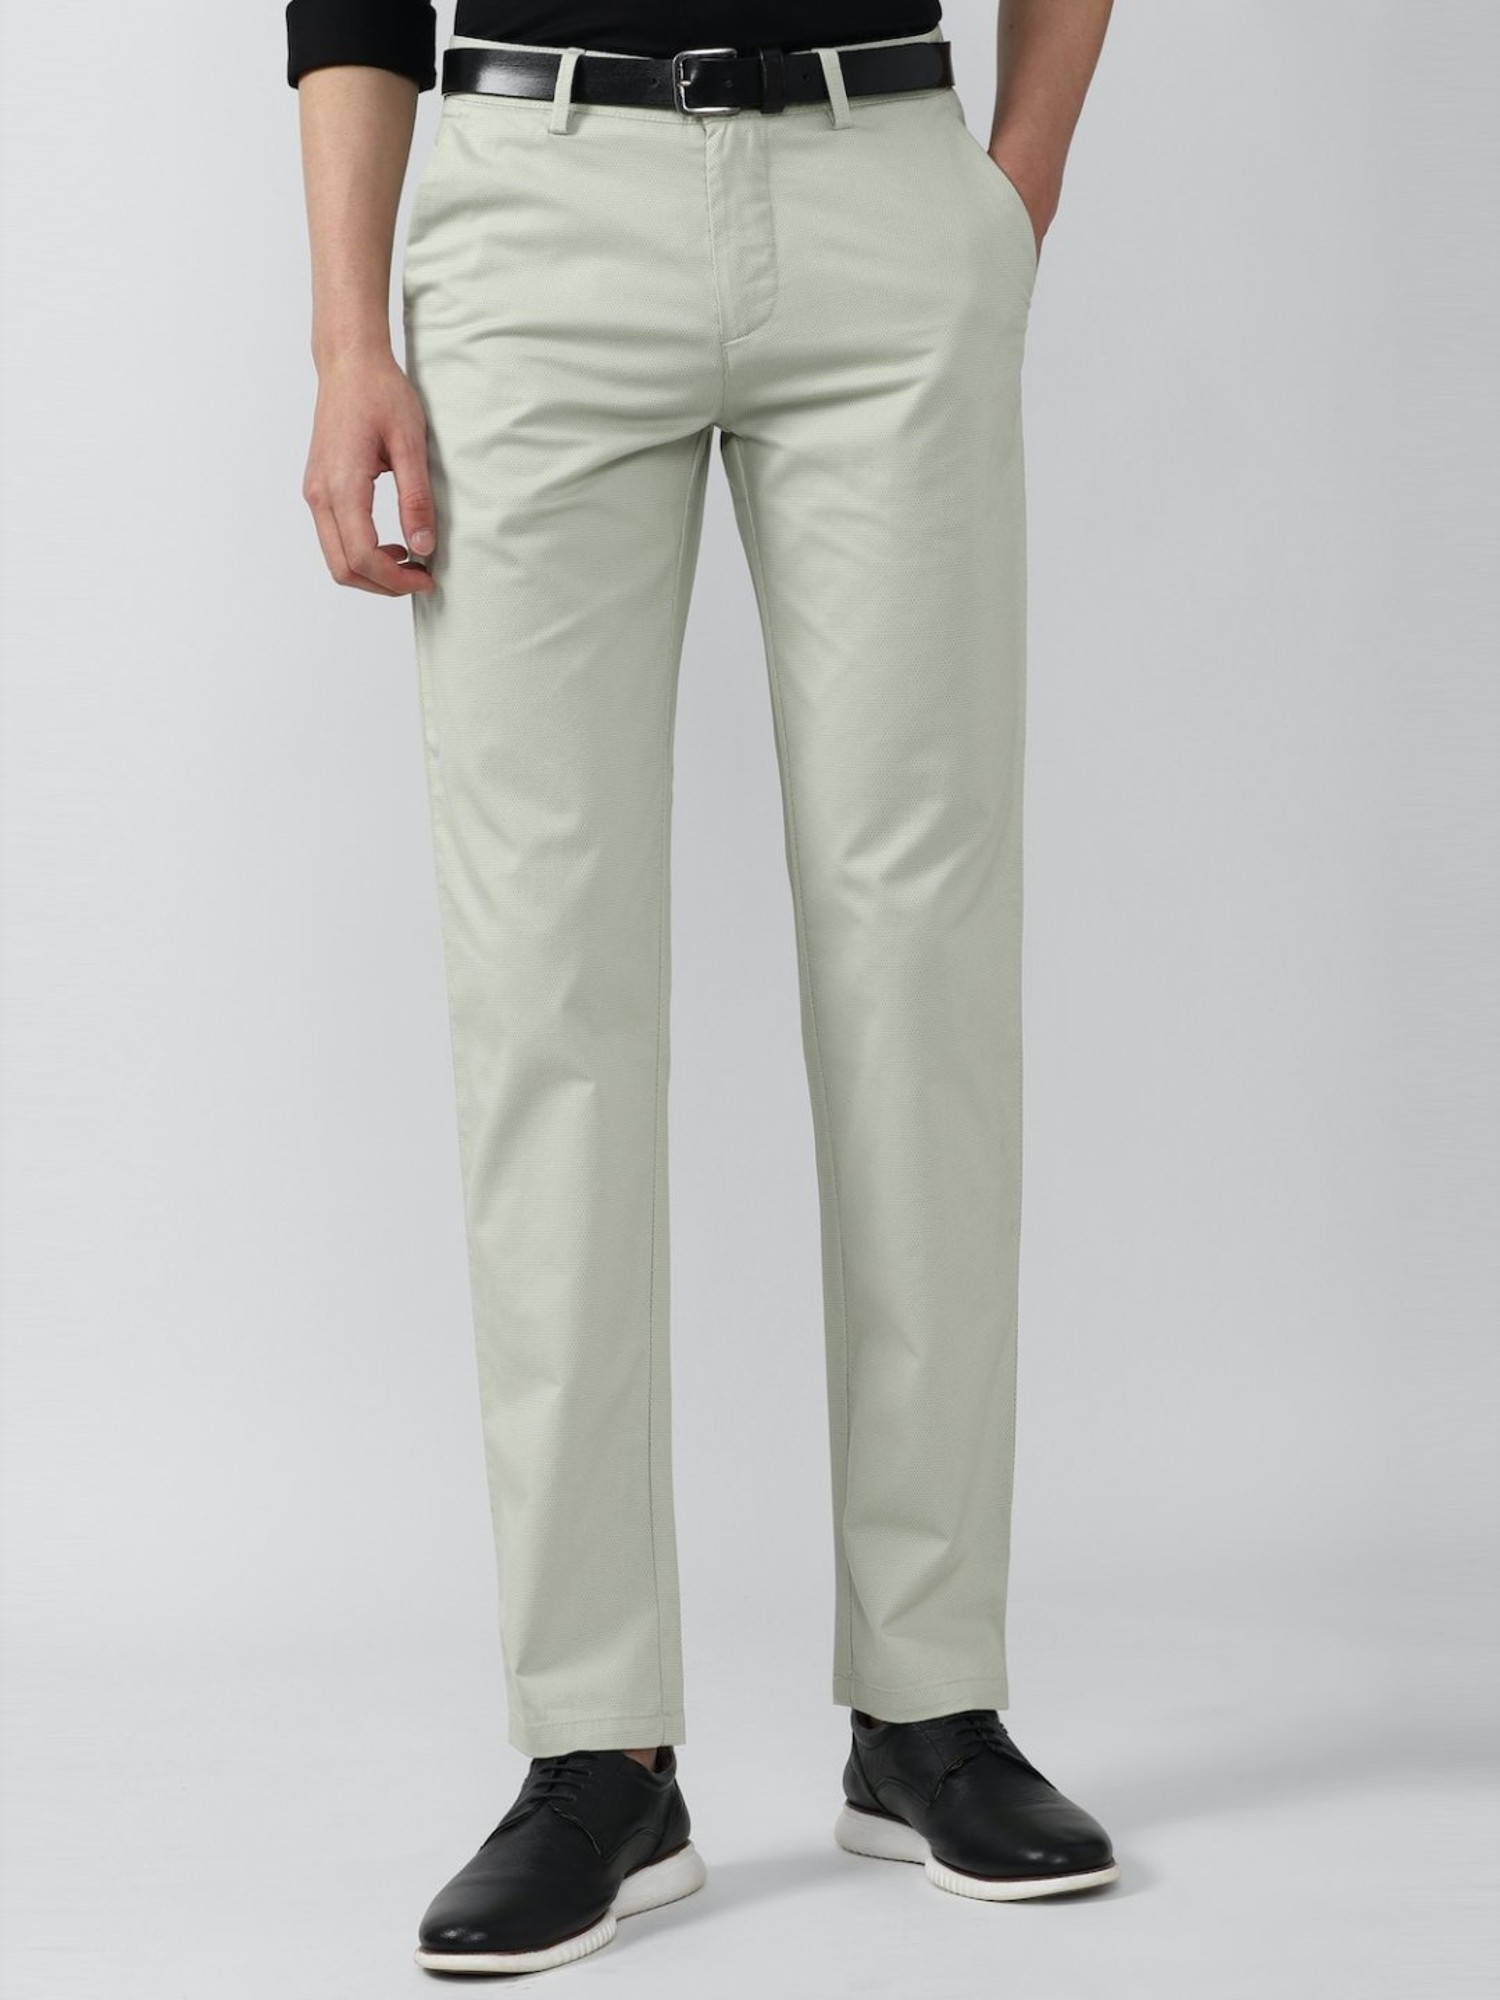 34  36 Grey Peter England Trousers